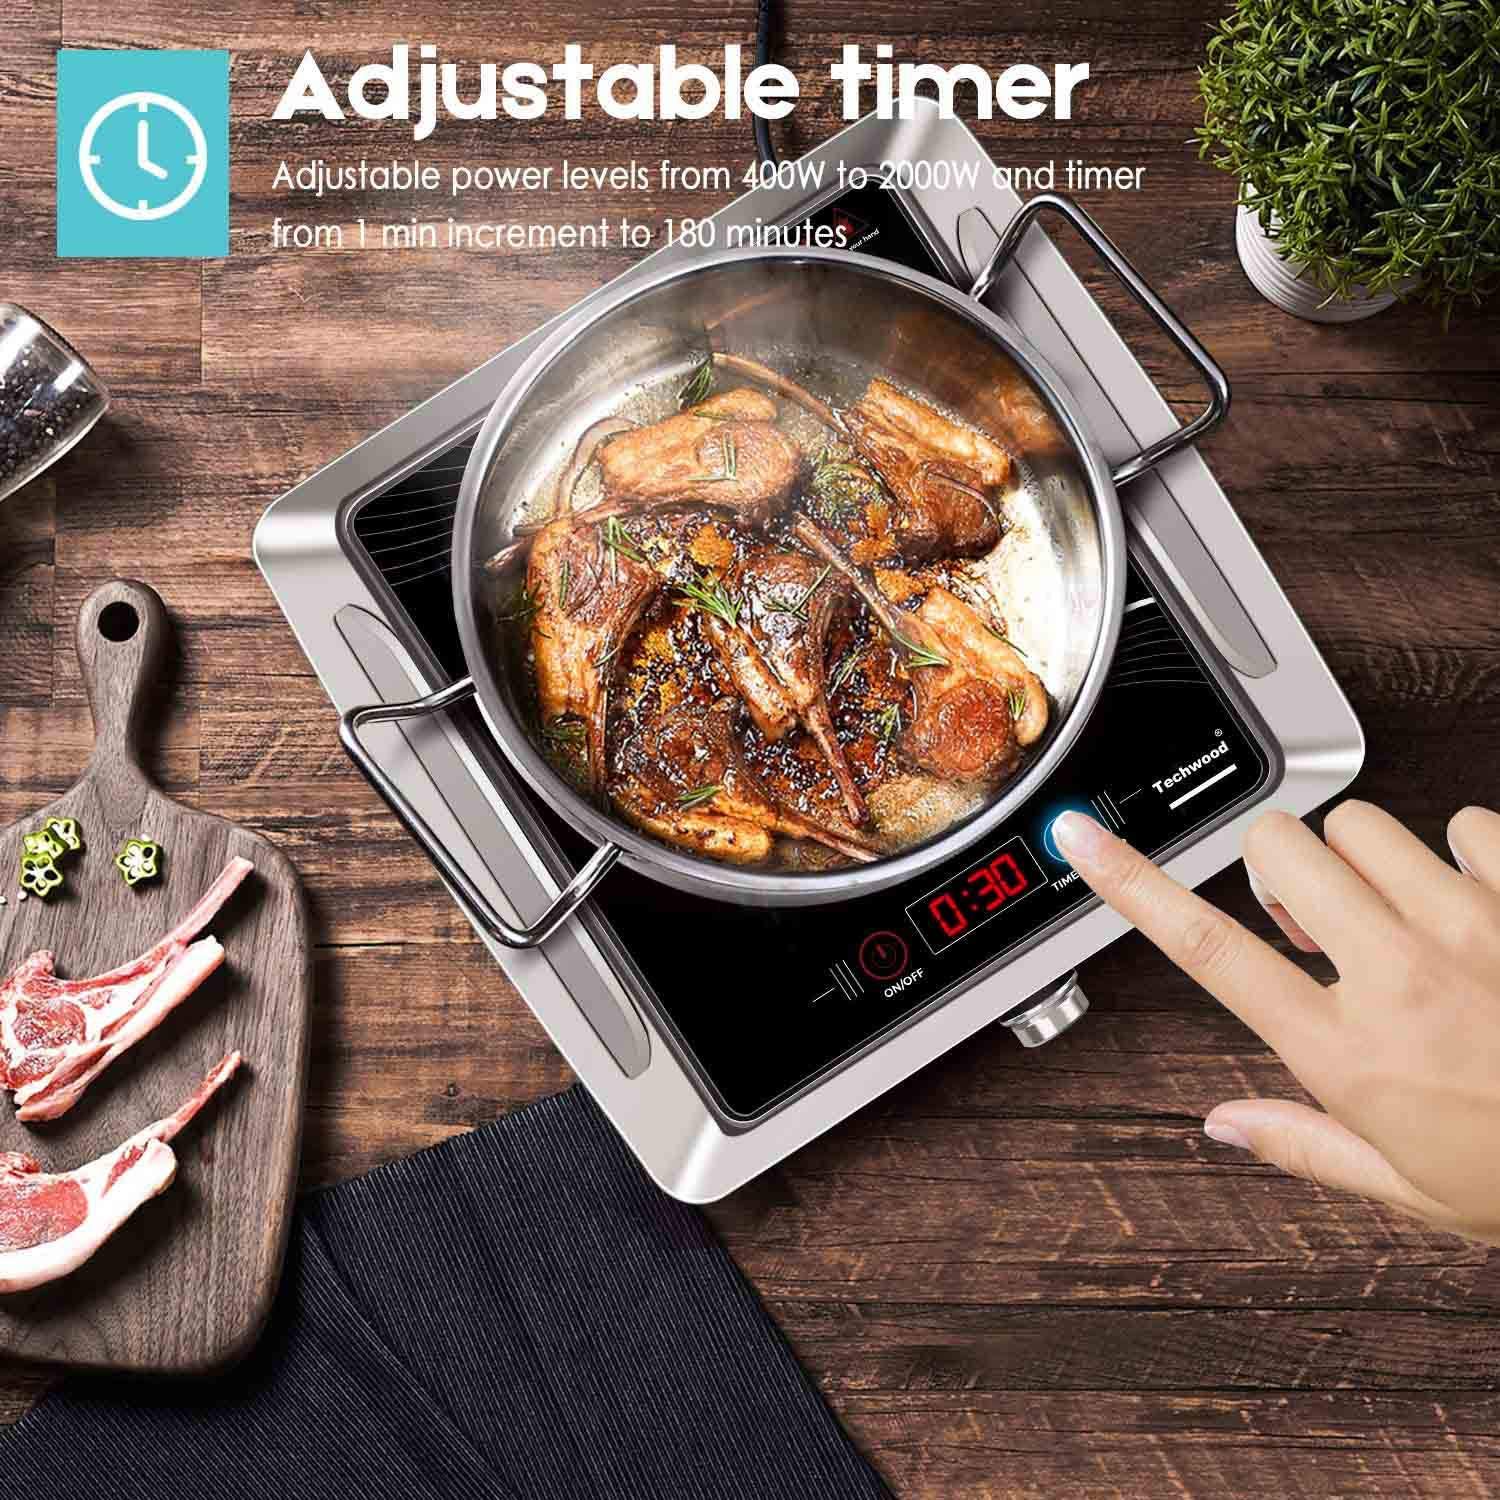 https://themarketdepot.com/wp-content/uploads/2023/01/Techwood-Hot-Plate-Electric-Stove-Single-Burner-Countertop-Infrared-Ceramic-Cooktop-1500W-Portable-Ceramic-Glass-Stainless-Steel-2.jpeg